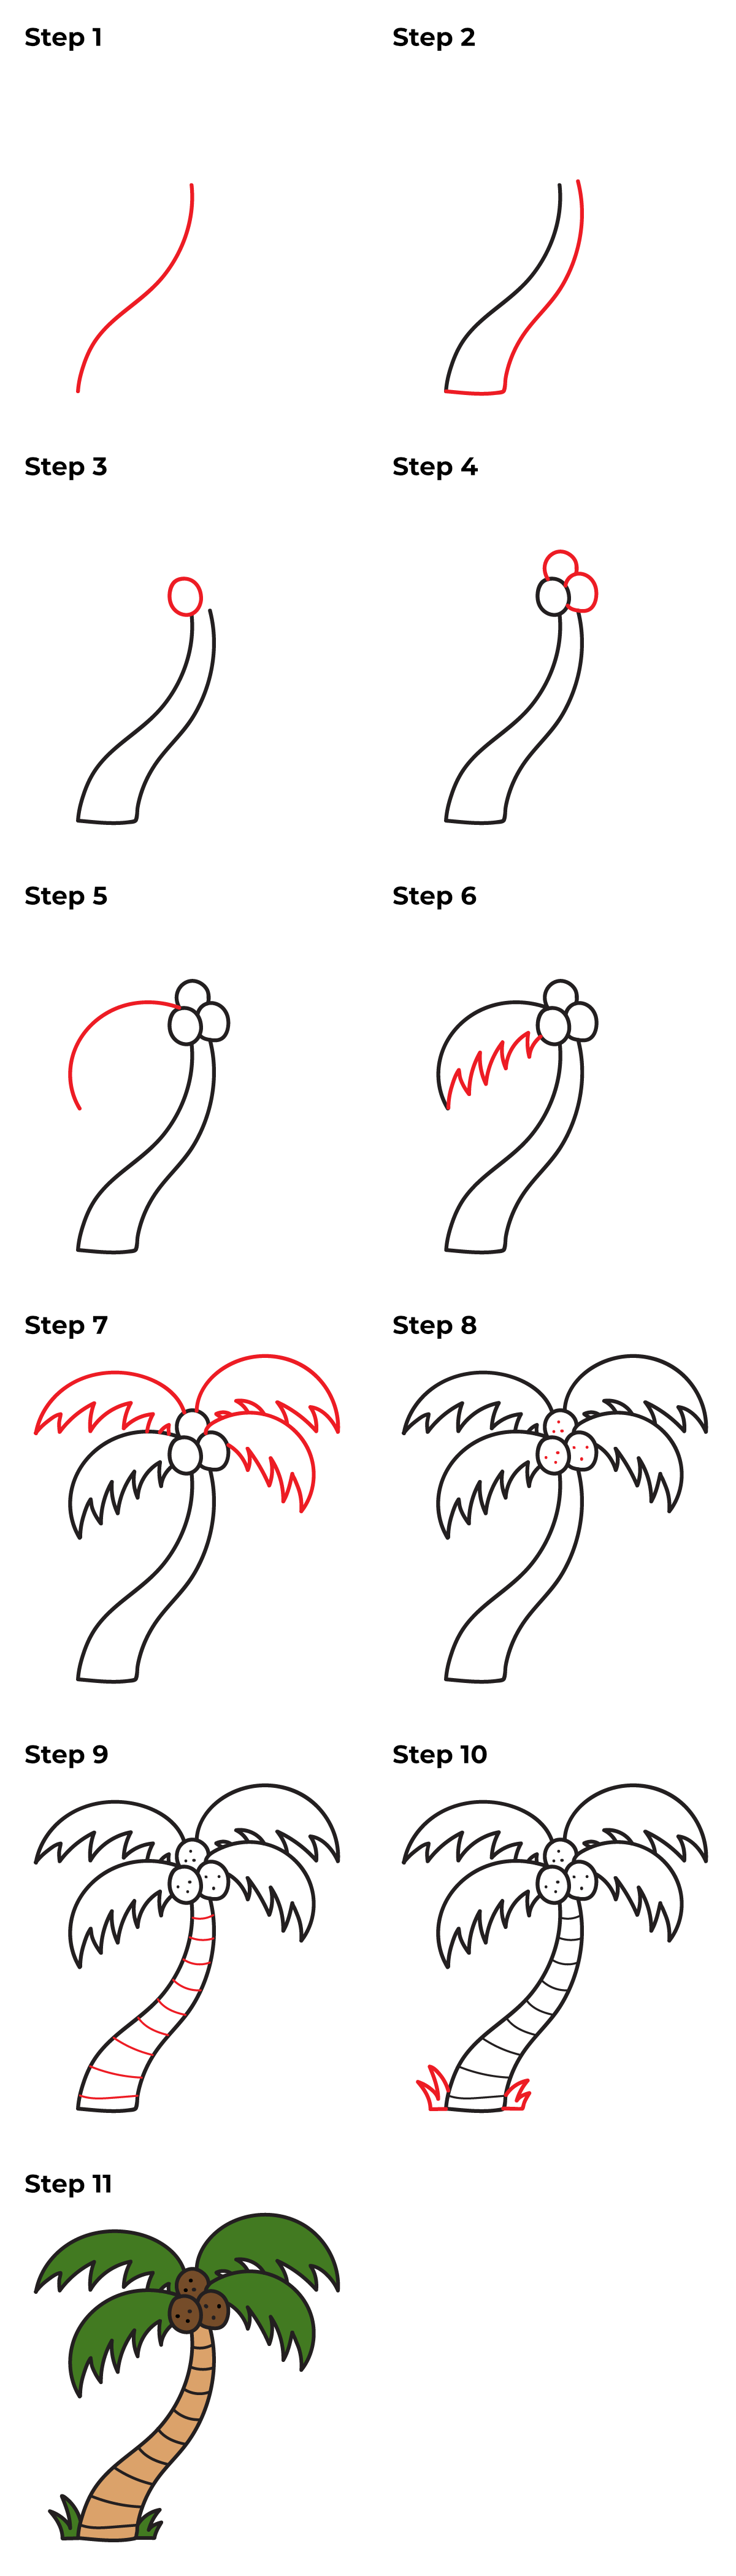 How to Draw a Palm Tree - Printable Tutorial